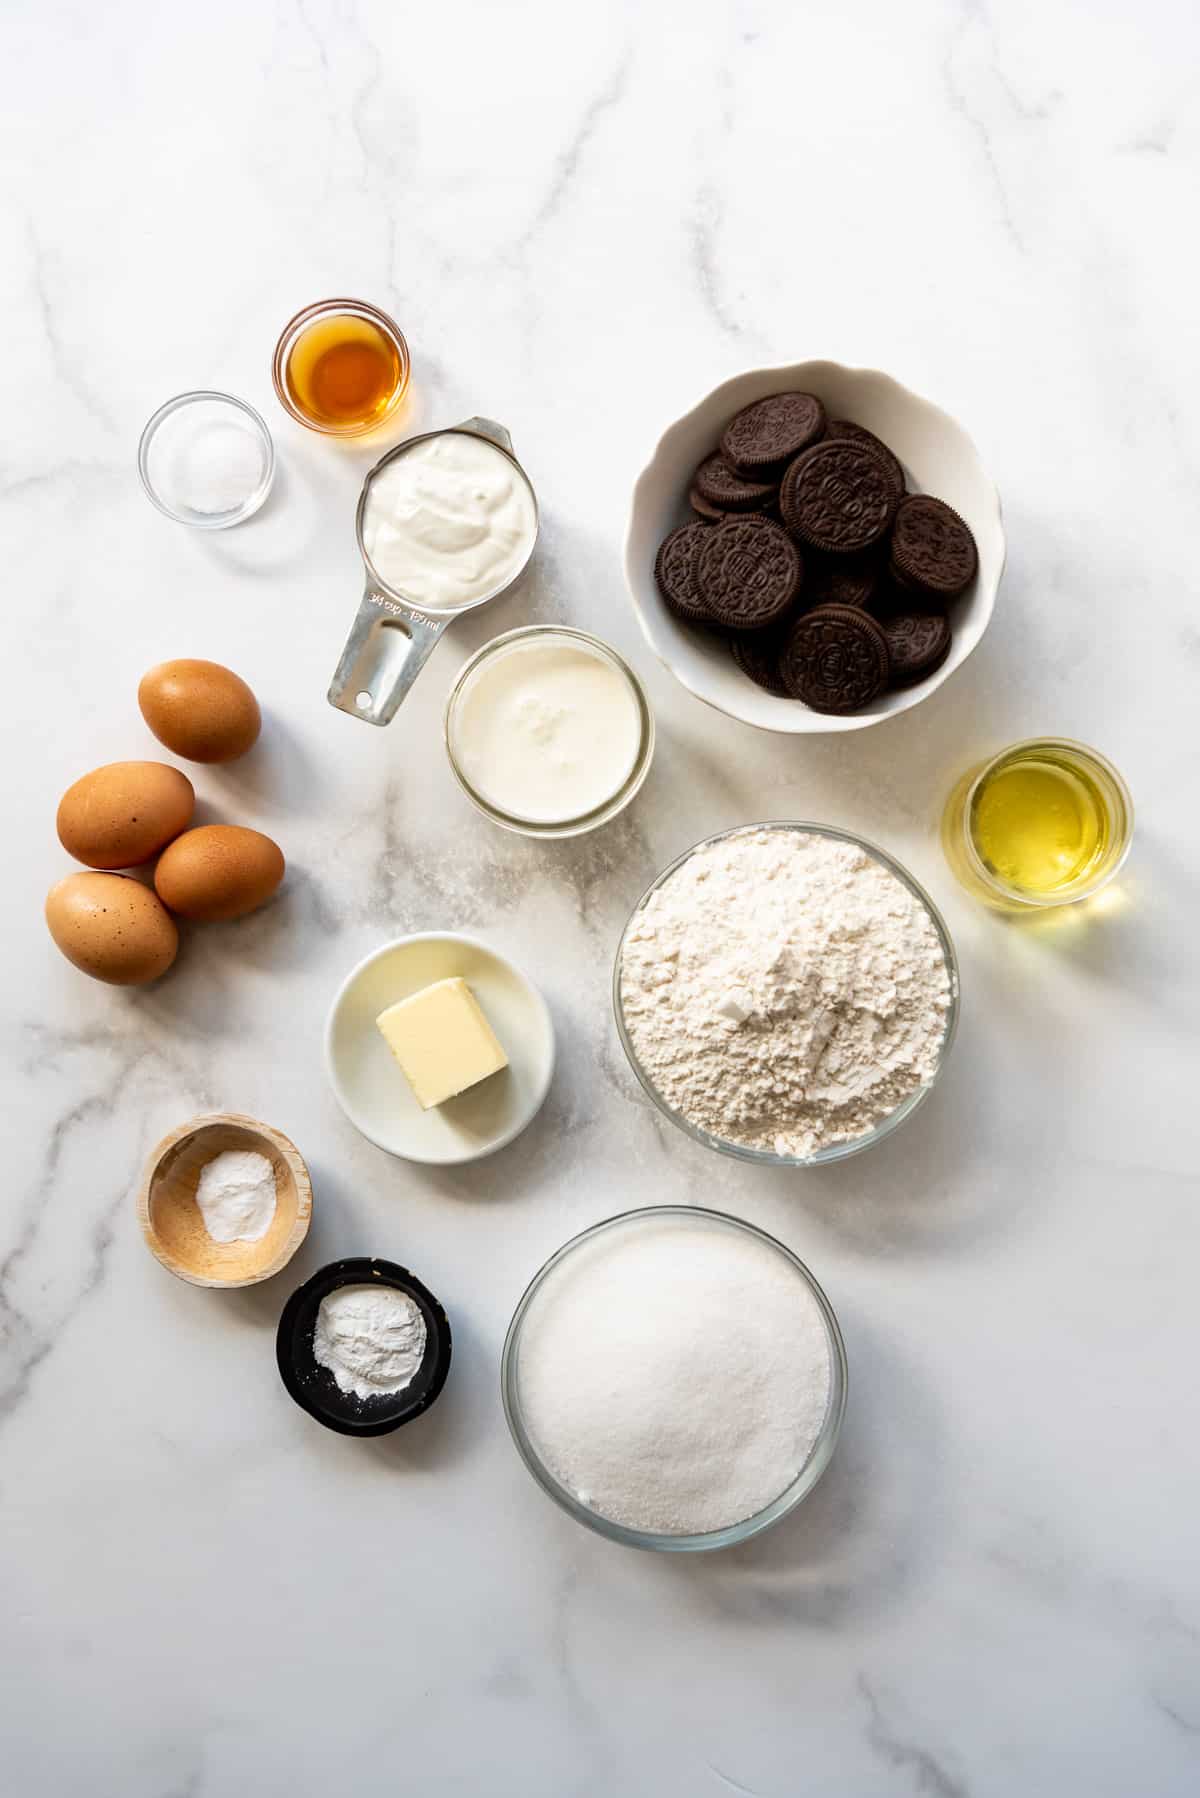 Ingredients for making a homemade Oreo cake.